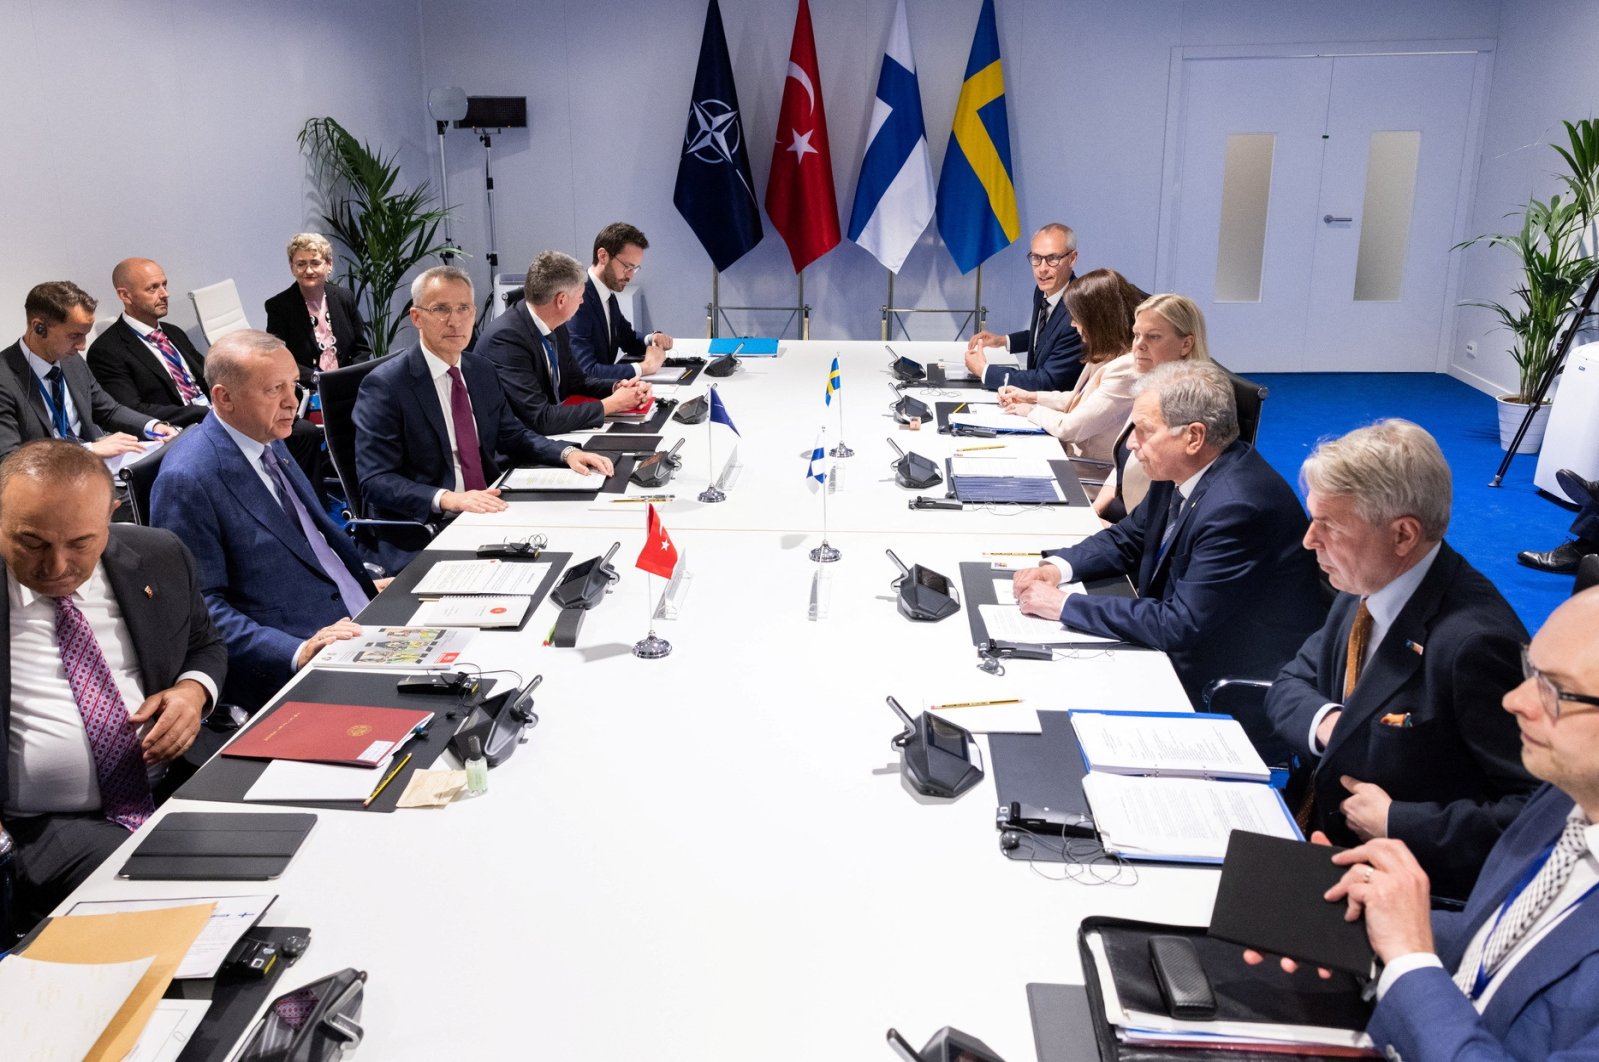 NATO Secretary-General Jens Stoltenberg, Turkish President Recep Tayyip Erdoğan, Swedish Prime Minister Magdalena Andersson and Finnish President Sauli Niinisto attend a trilateral meeting between Turkey, Finland and Sweden on the day of a NATO summit in Madrid, Spain, June 28, 2022. (REUTERS)